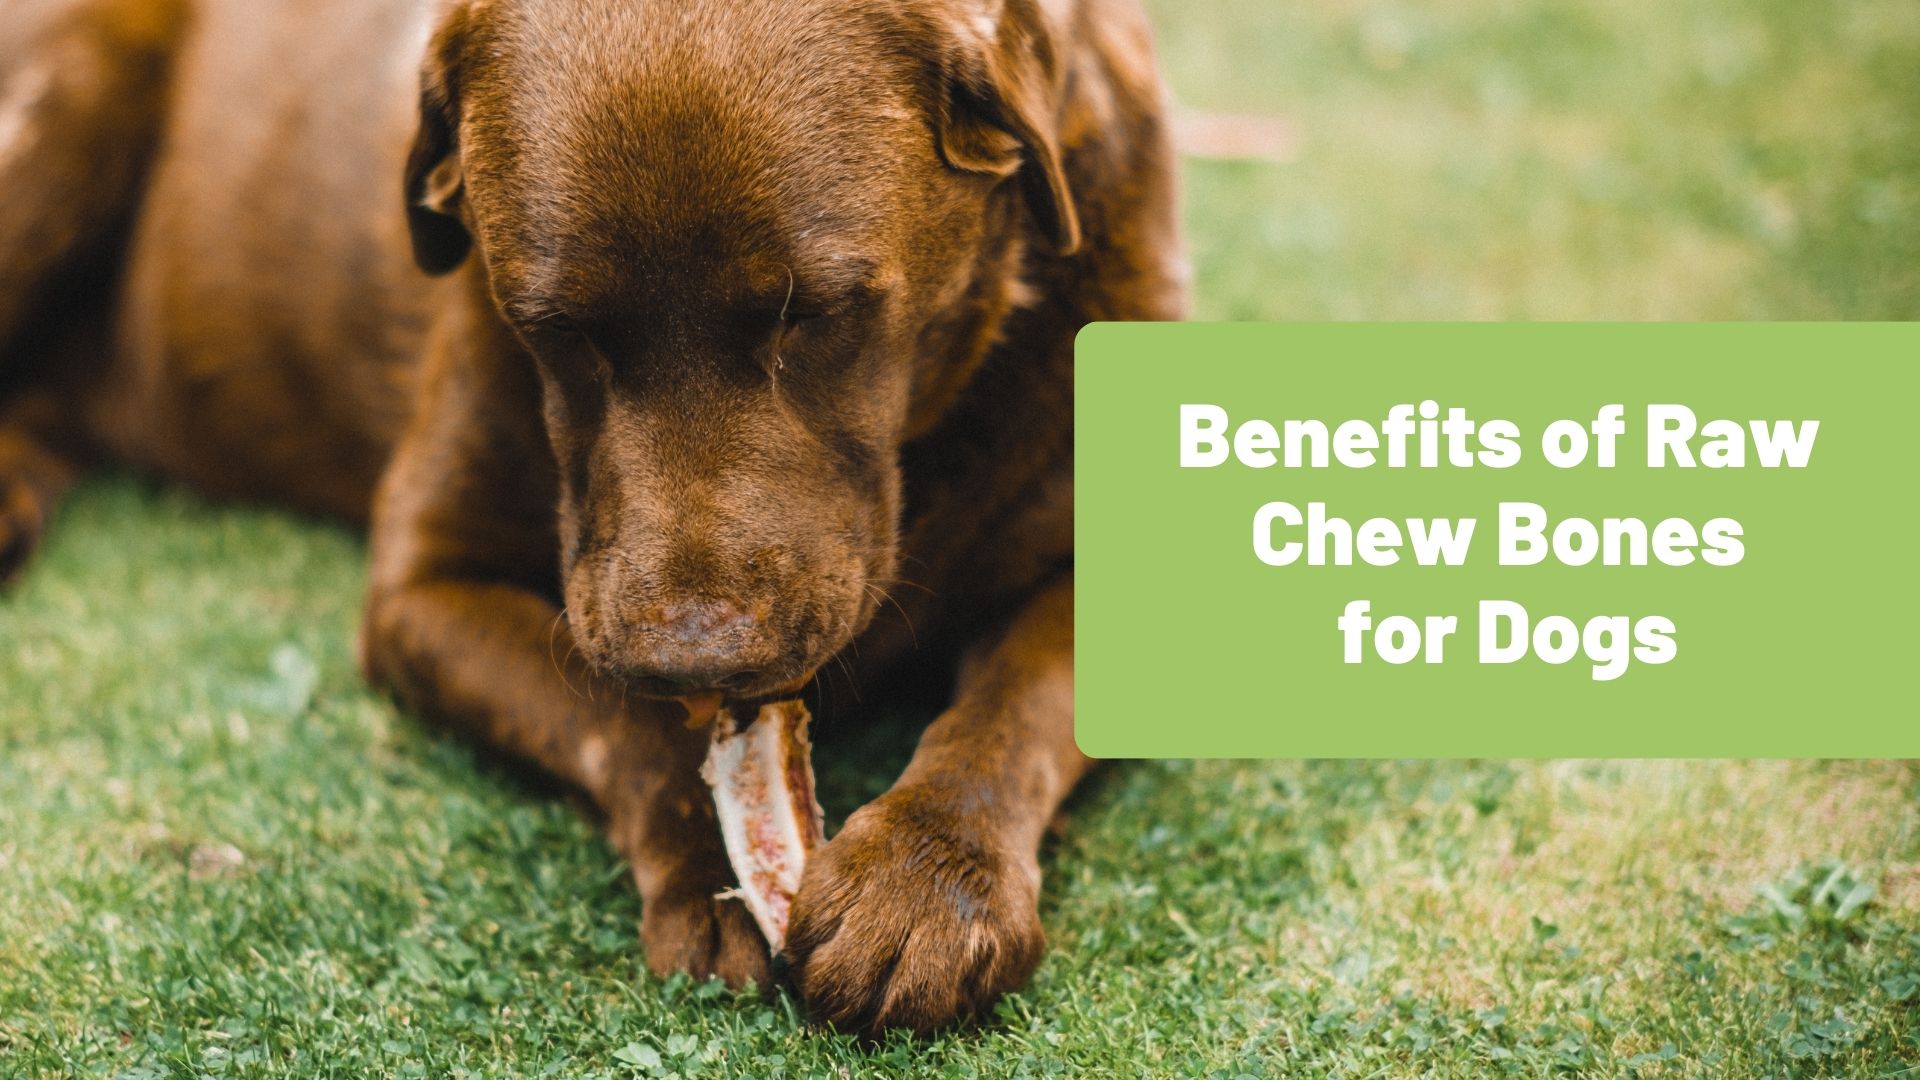 Benefits of Raw Chew Bones for Dogs - RawOrigins.Pet - The Raw Dog Food Company